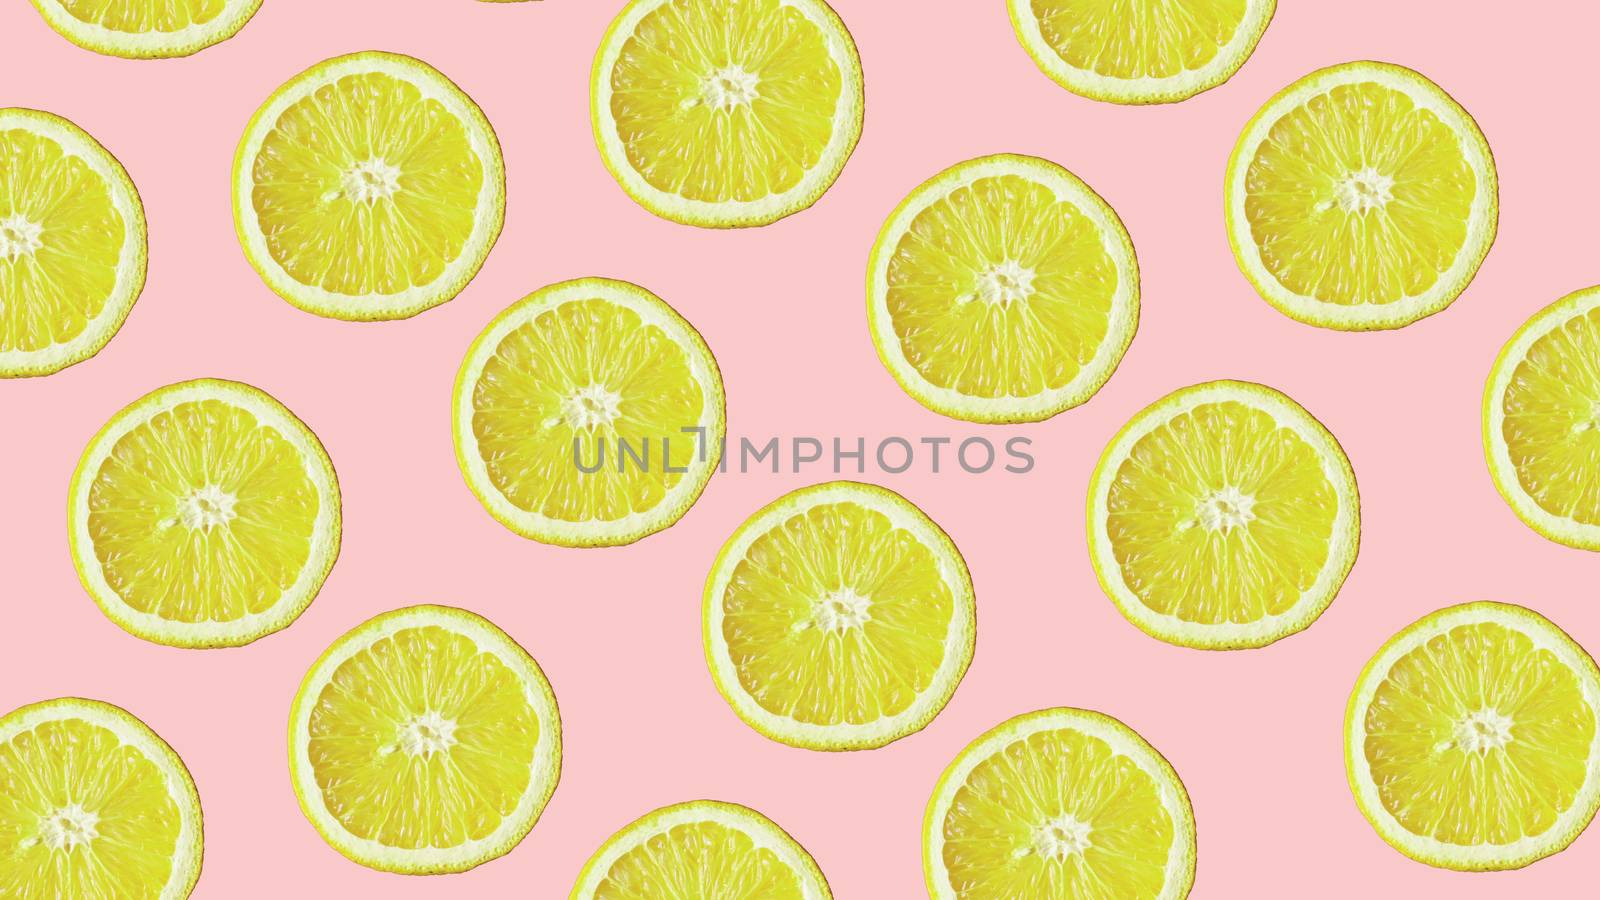 Top view of colorful fruit pattern of fresh lemon on modern pink background